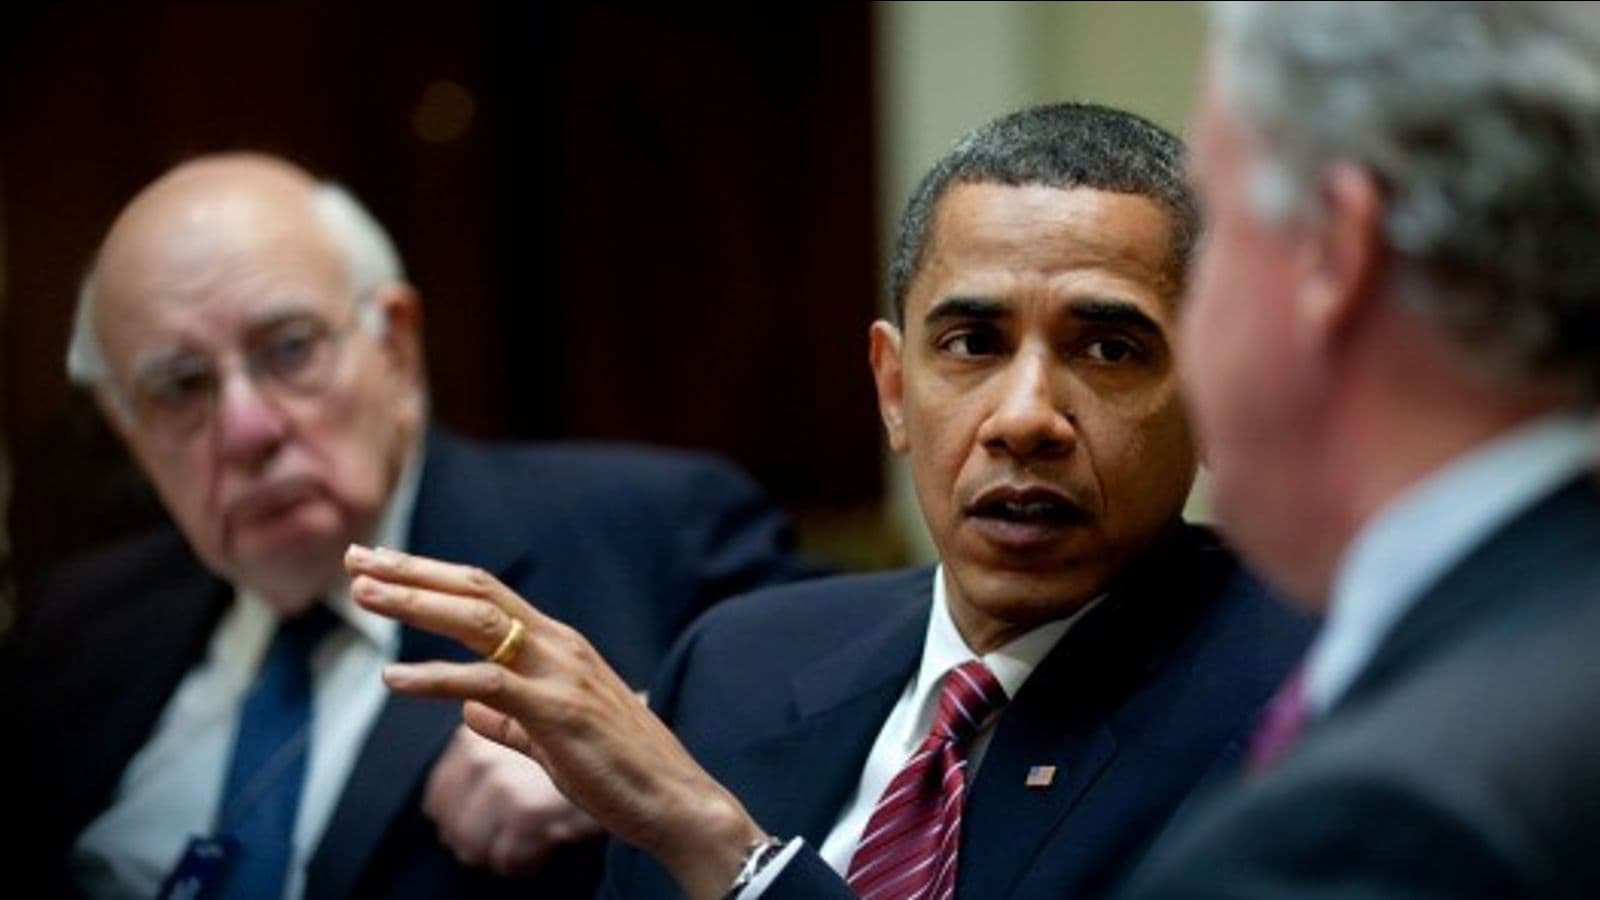 President Barack Obamaa, flanked by Paul Volcker, left, and General Electric Chief Executive Officer Jeffrey Immelt, right, comments during the Economic Recovery Advisory Board meeting in the Roosevelt Room of the White House.